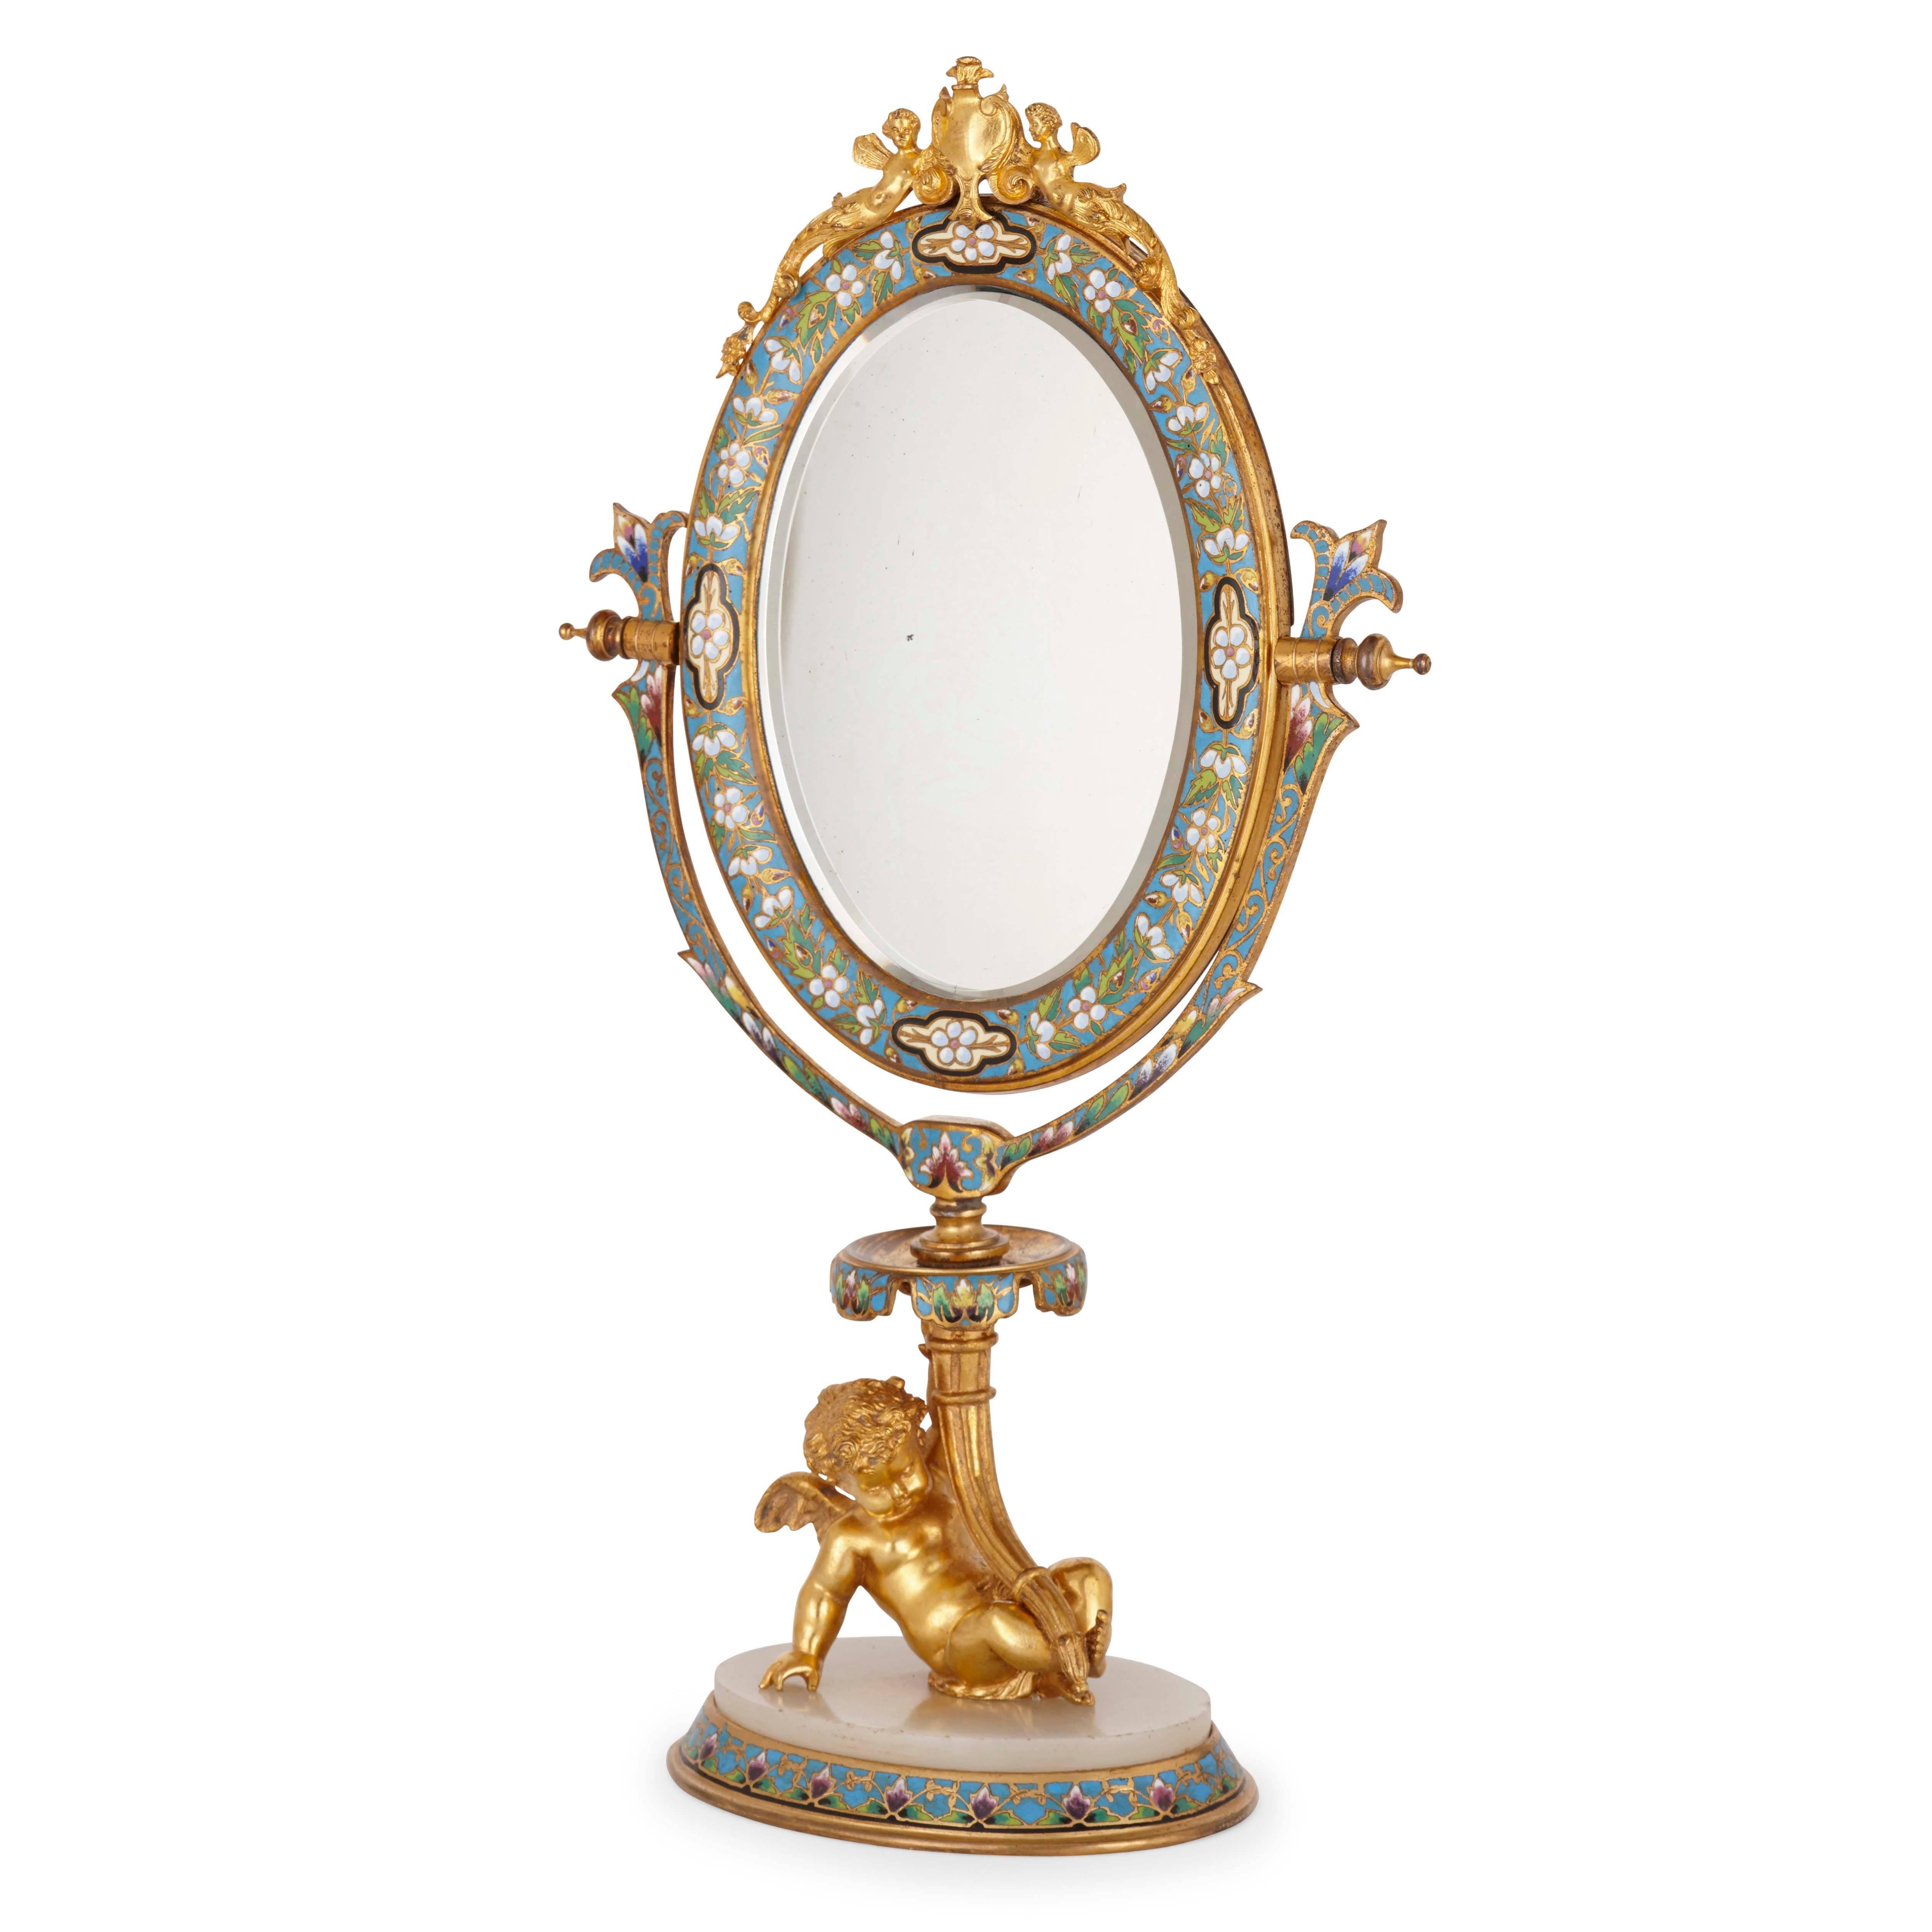 The hinged oval shaped mirror set on a cherub support with alabaster plinth, the top of the mirror surmounted by two winged female figures of ormolu.

This beautiful French mirror is decorated with a delicate, floral champlevé enamel pattern and